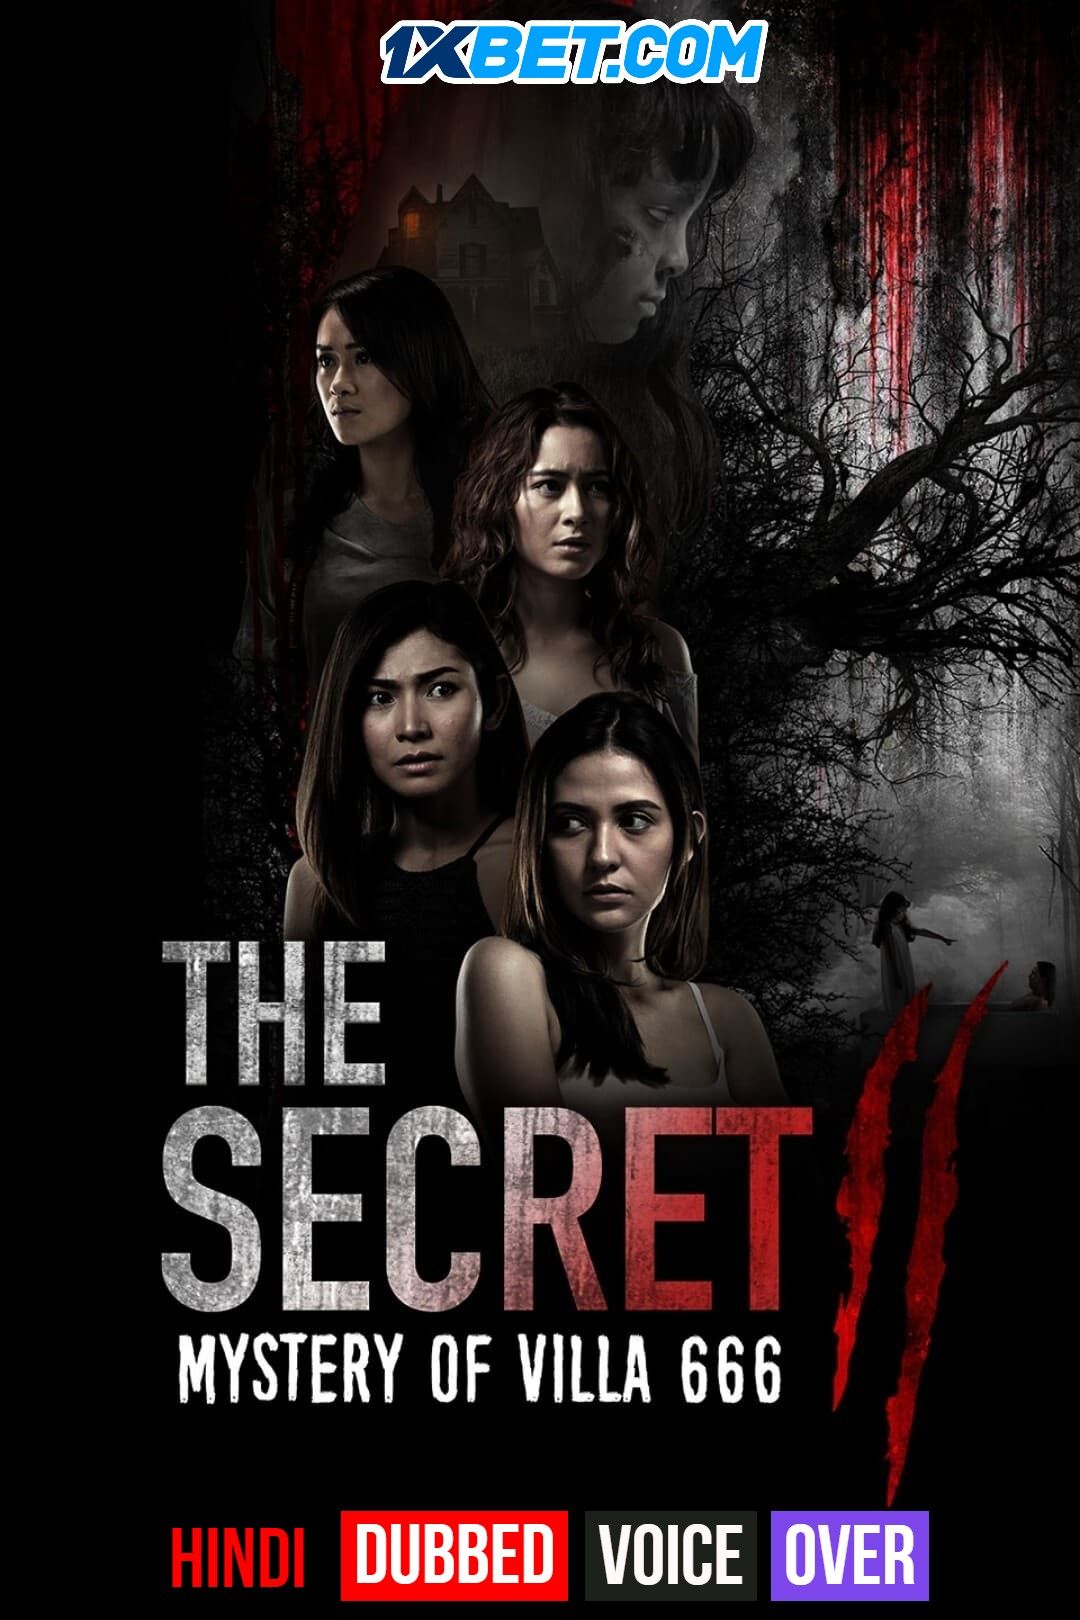 The Secret 2: Mystery of Villa 666 (2021) Hindi (Voice Over) Dubbed WEBRip download full movie